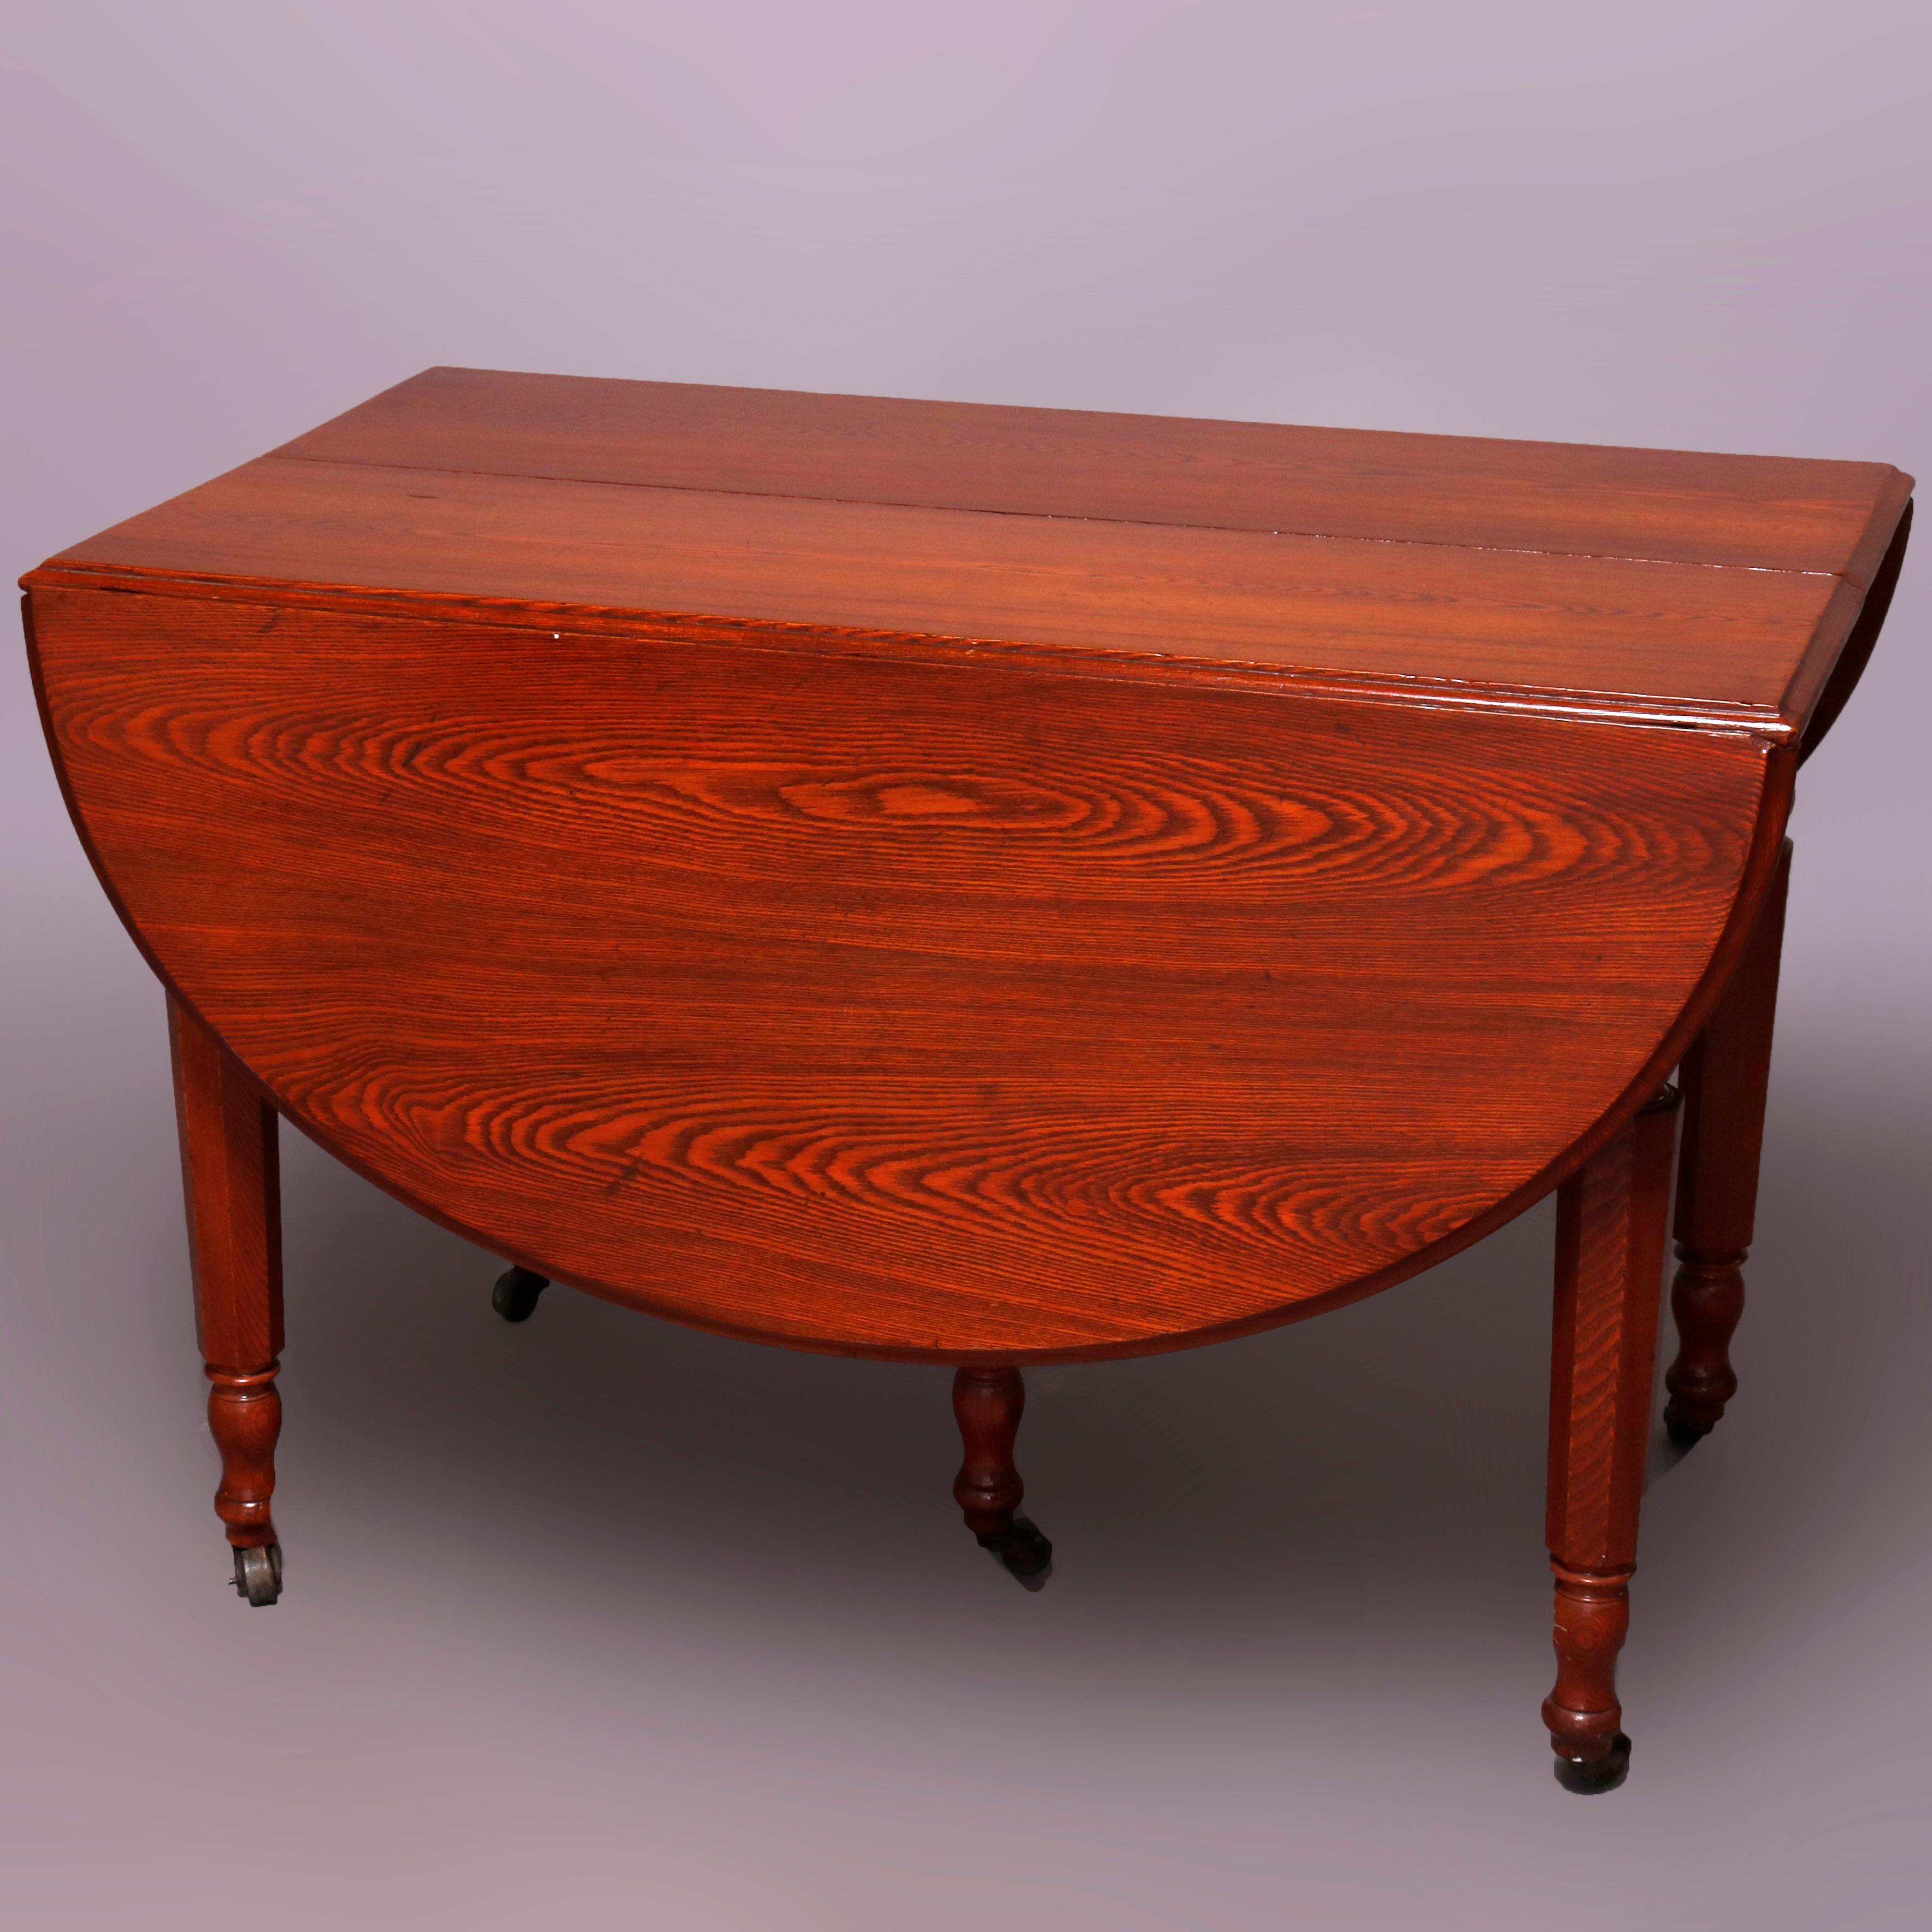 Sheraton Chestnut Drop Leaf Banquet Dining Table with 5 Leaves, circa 1910 3